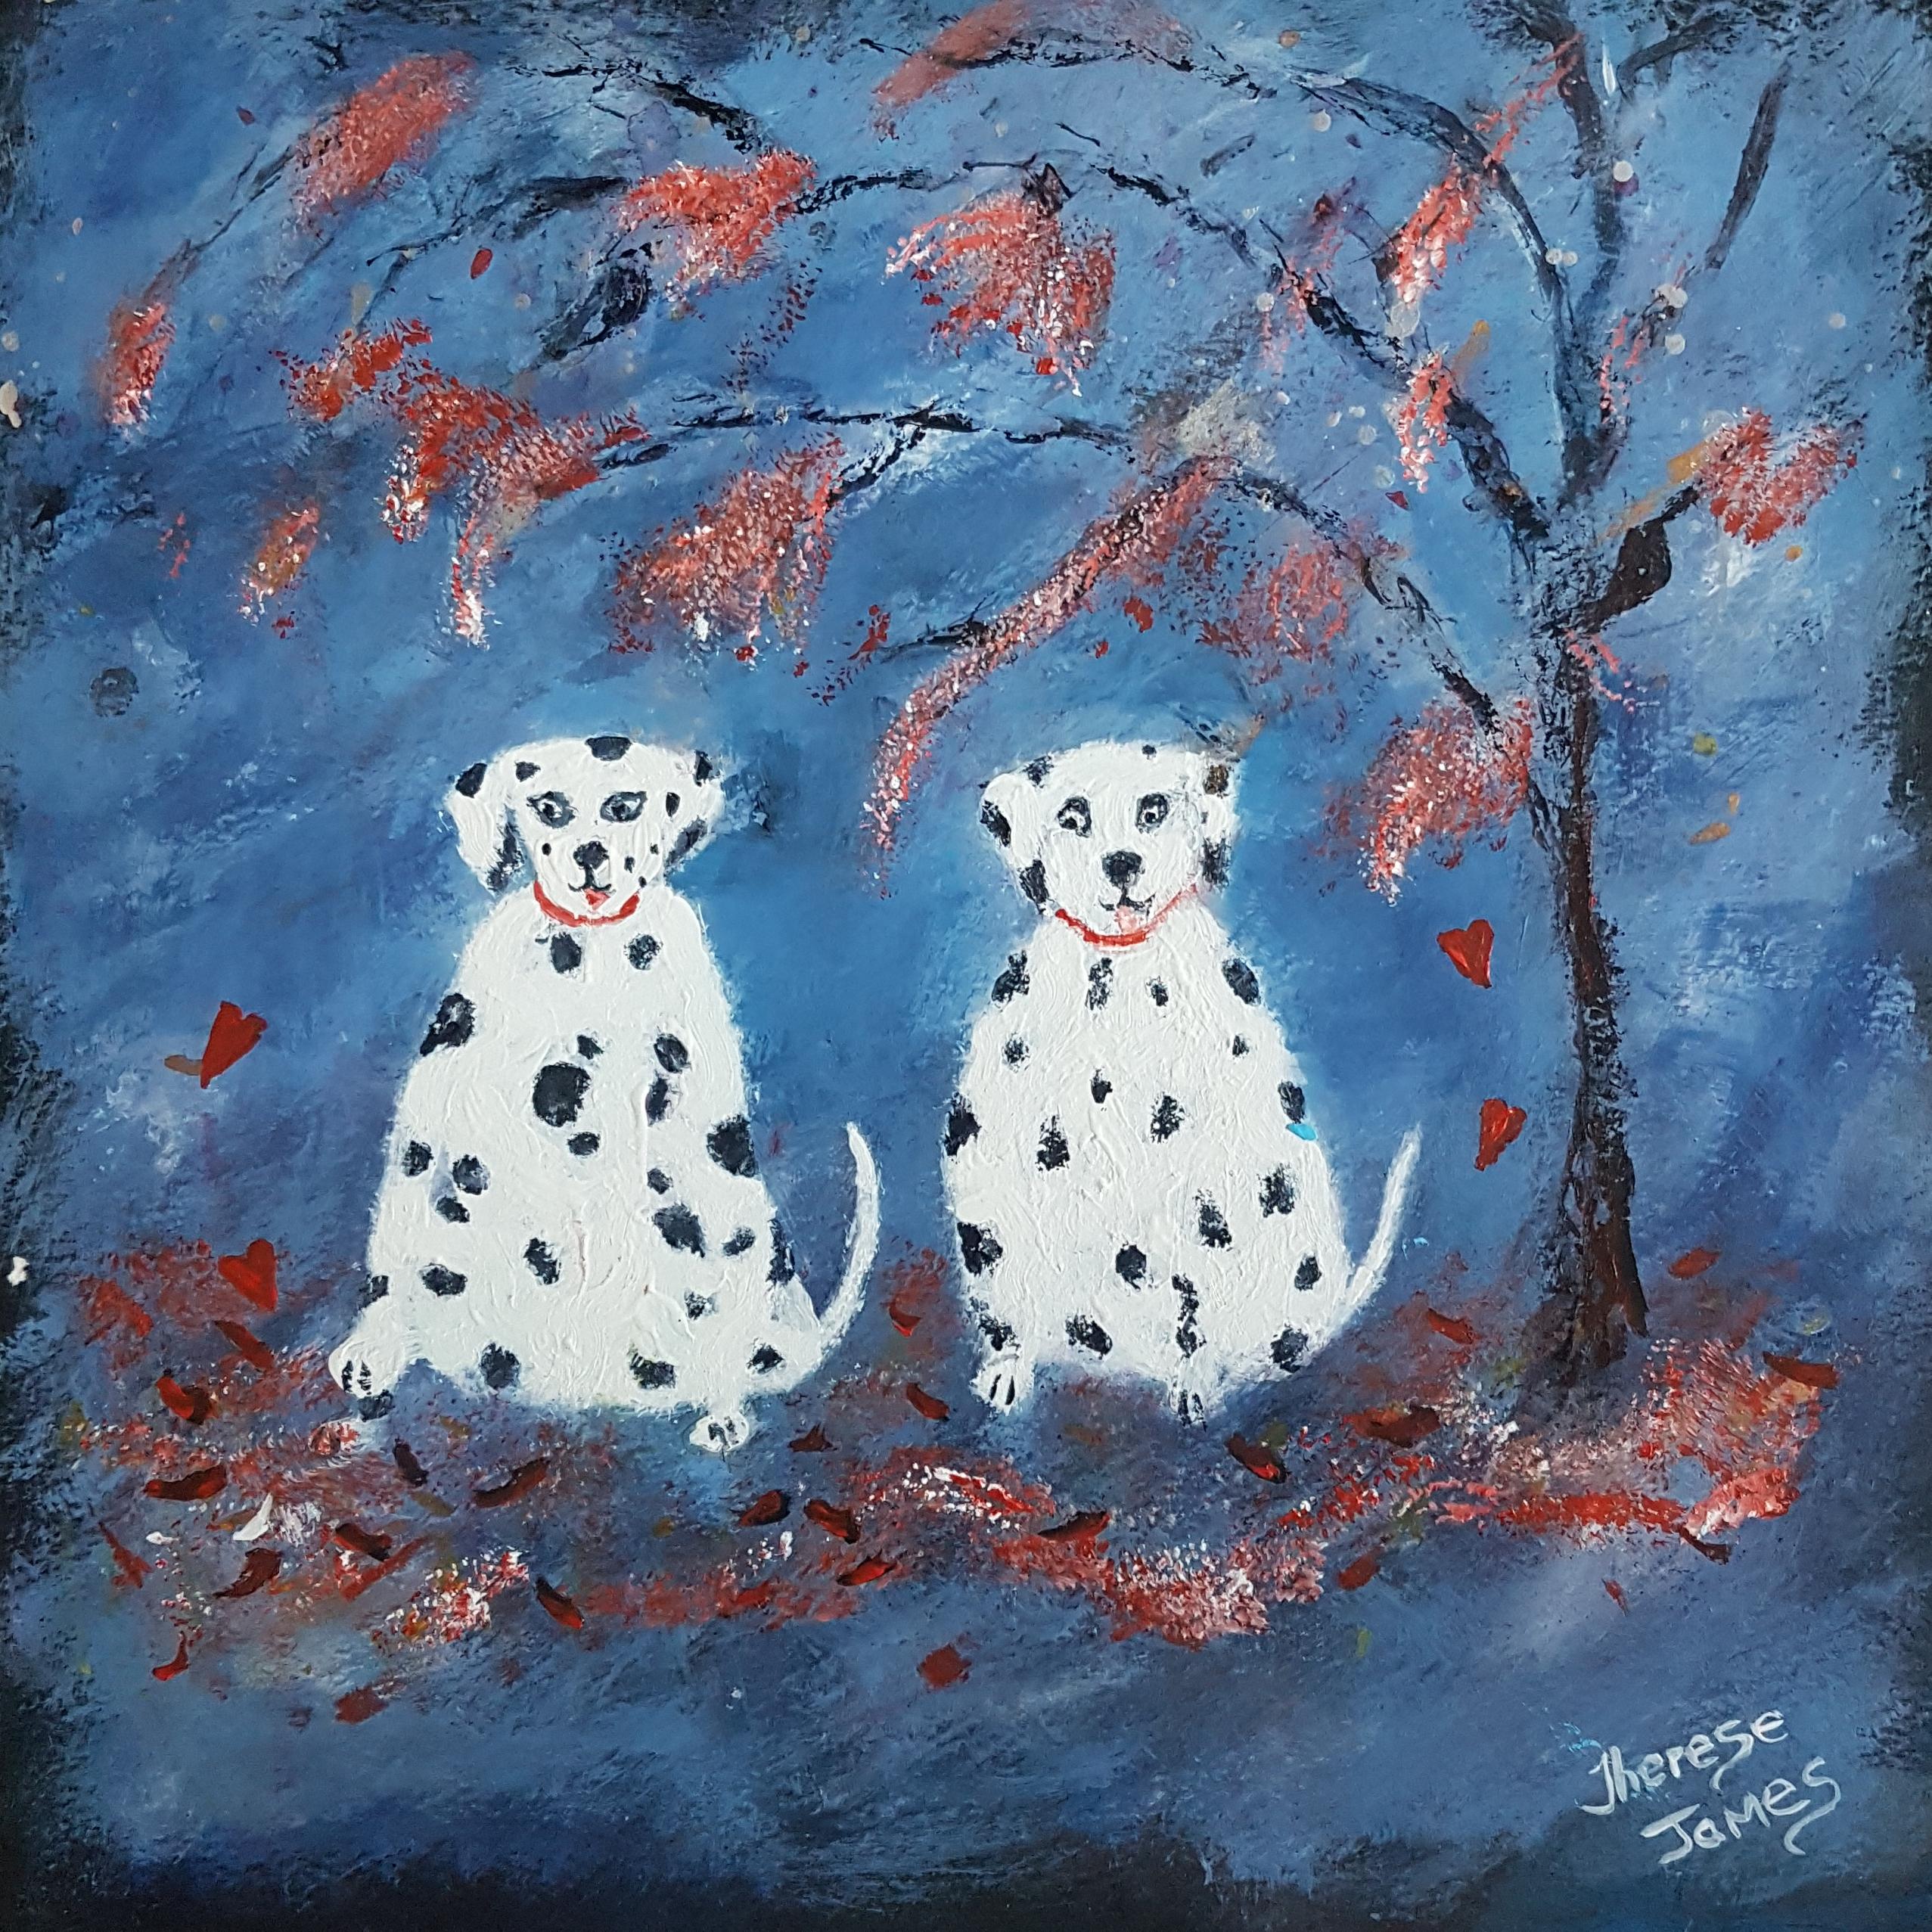 Therese James Animal Painting - "Dotty Dogs" Contemporary Mixed Media on Paper Painting